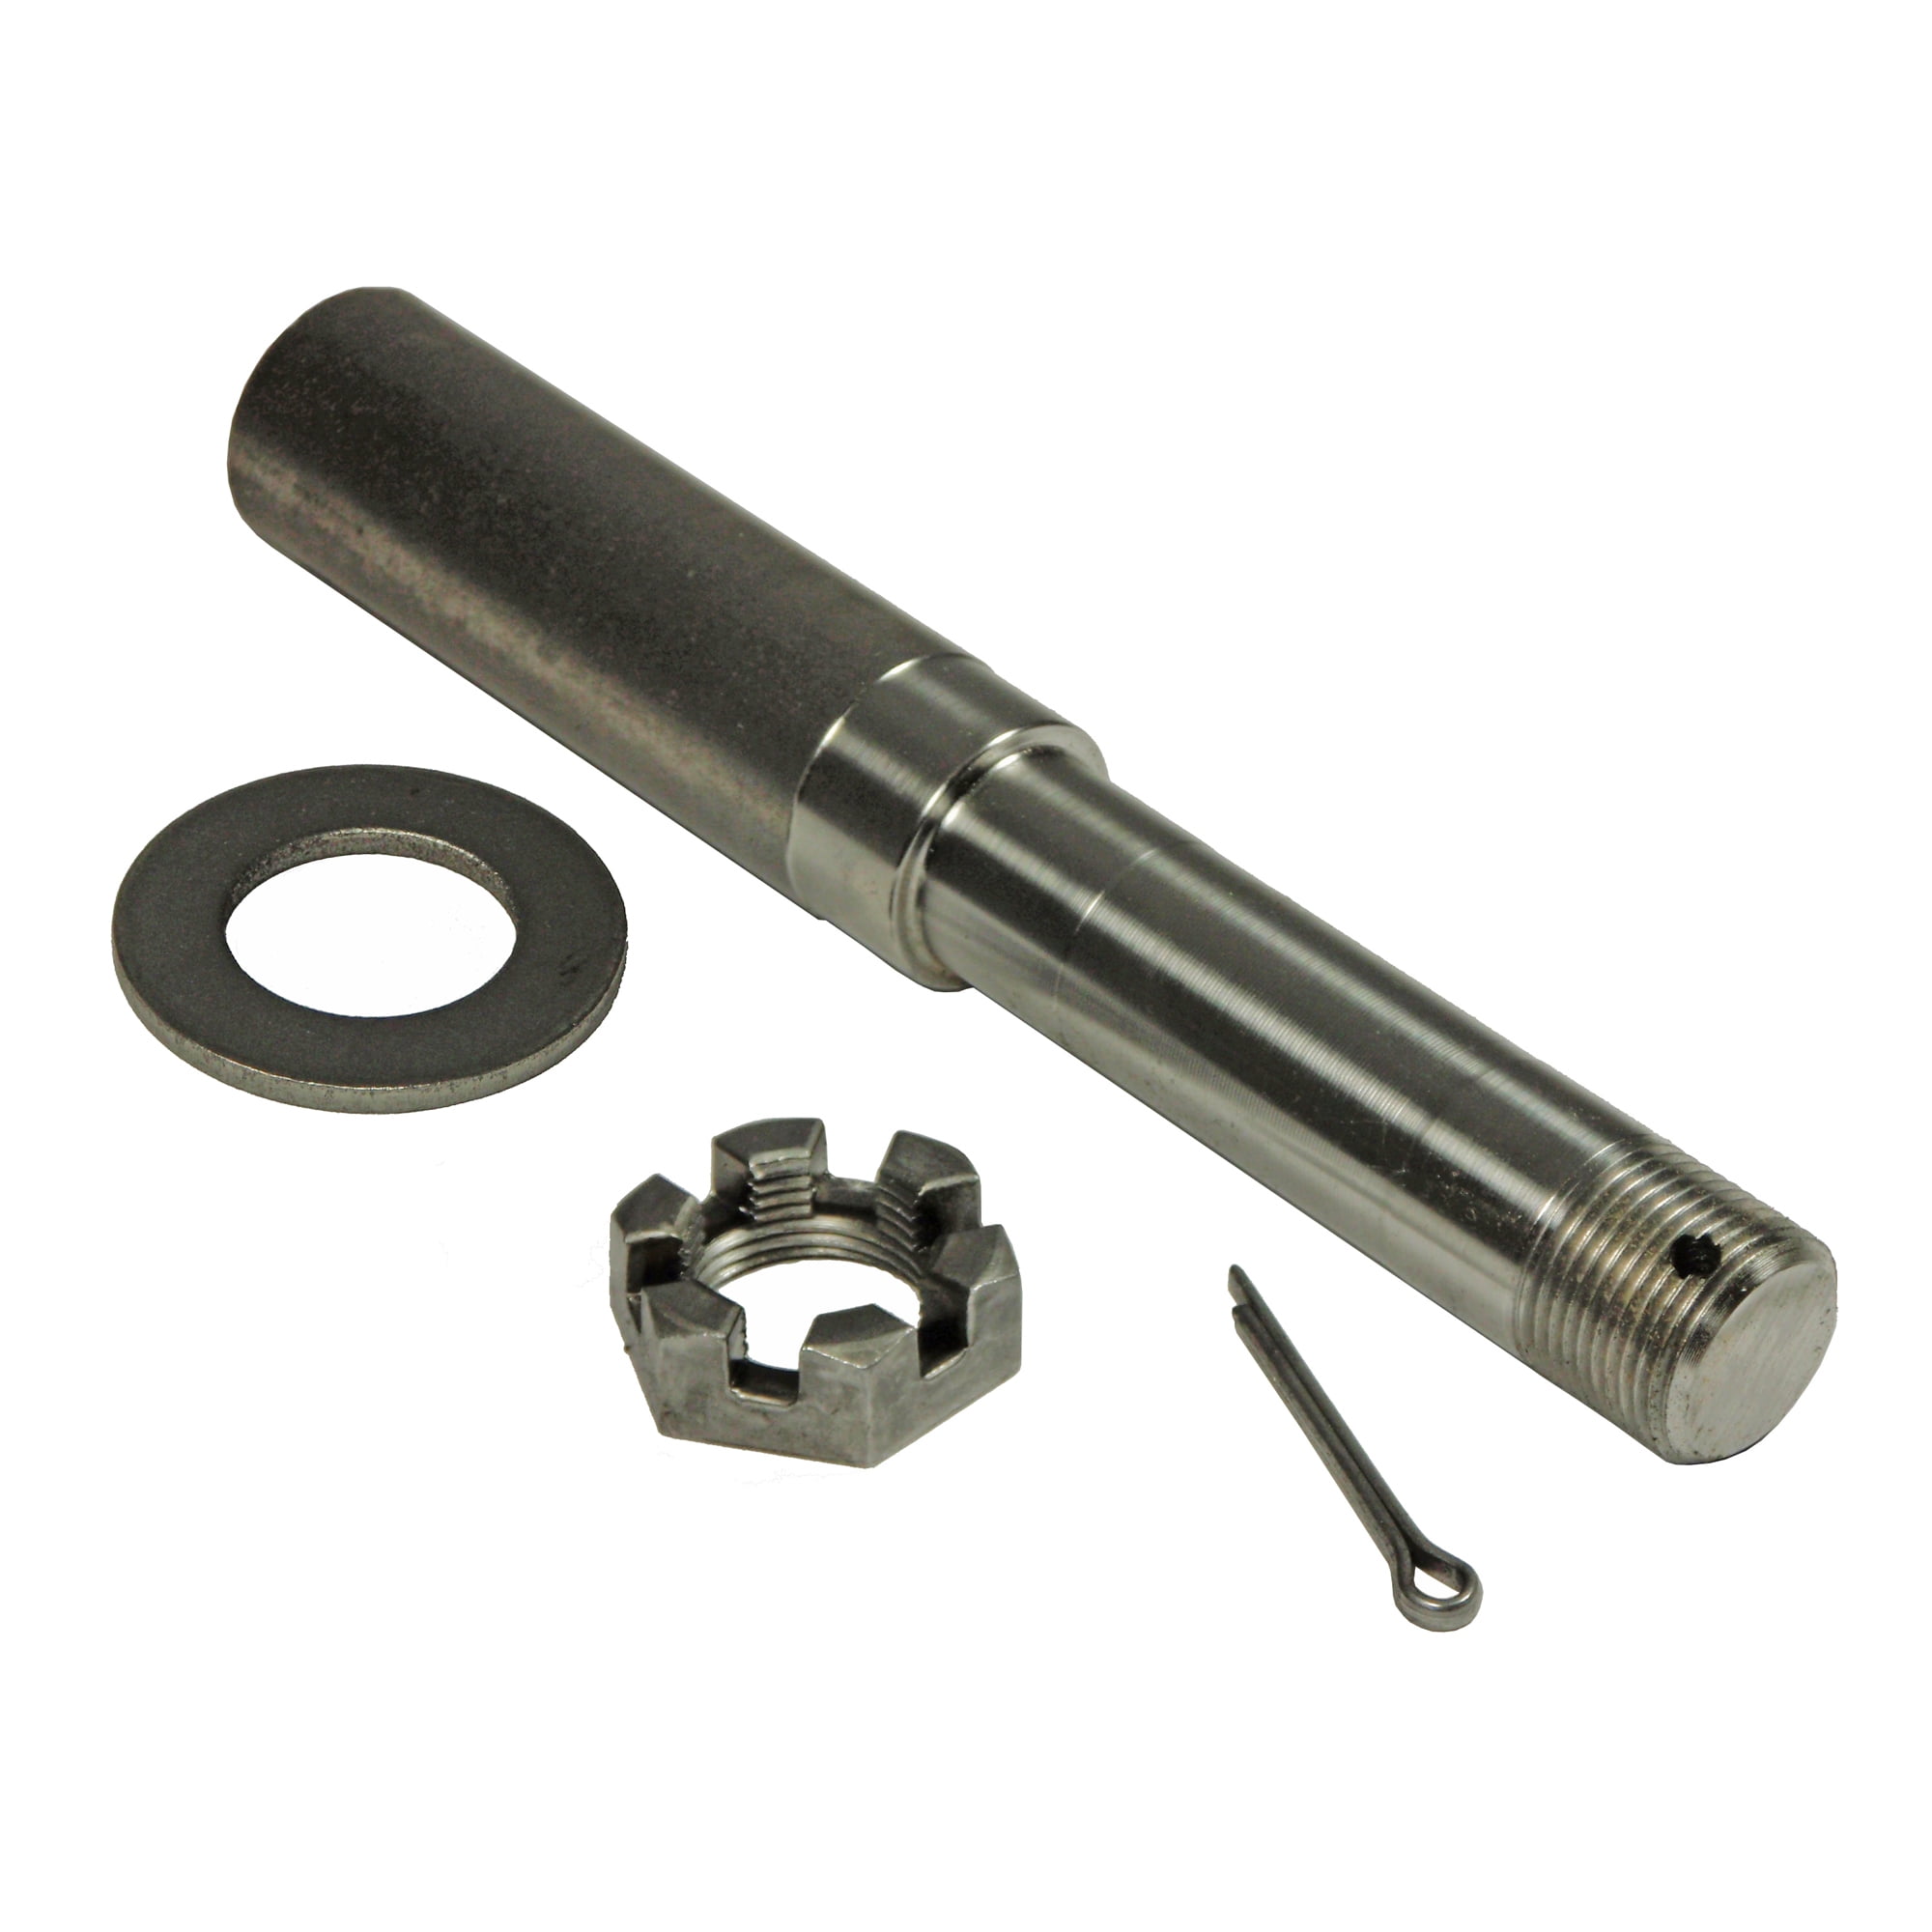 Trailer Axle Spindle (SA-1250) For 1 Inch I.D. Bearings